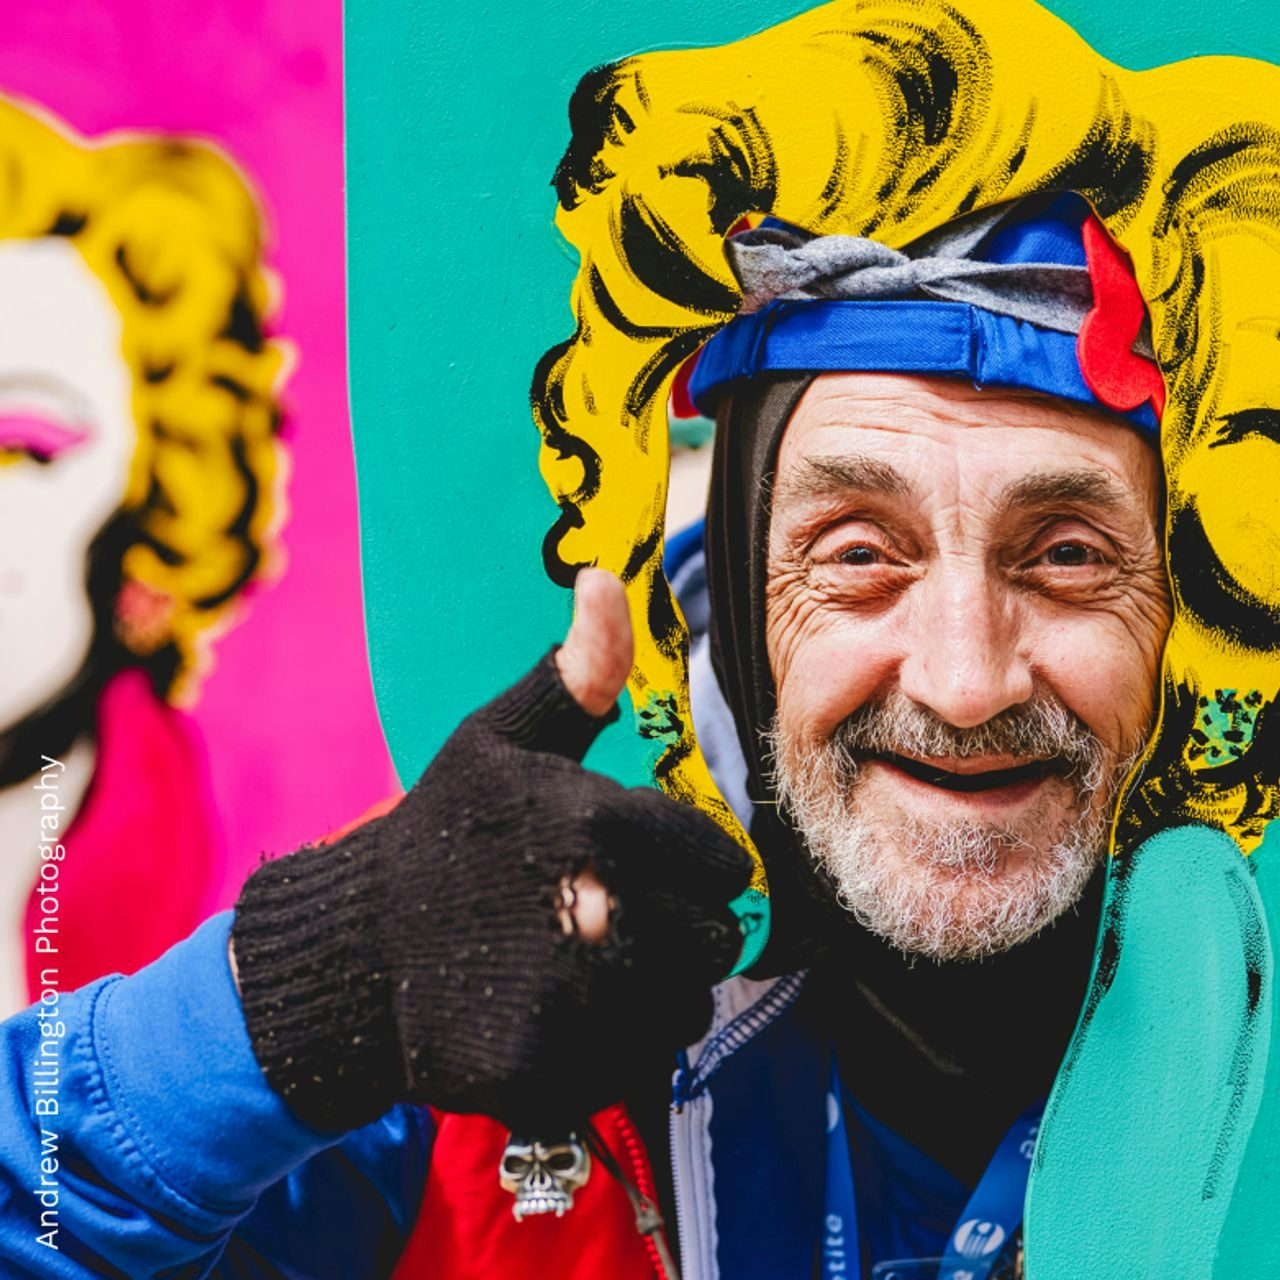 Man smiling through cut out of a colourful display with a silhouette of a woman as the background. Photo credited to Andrew Billington Photography.